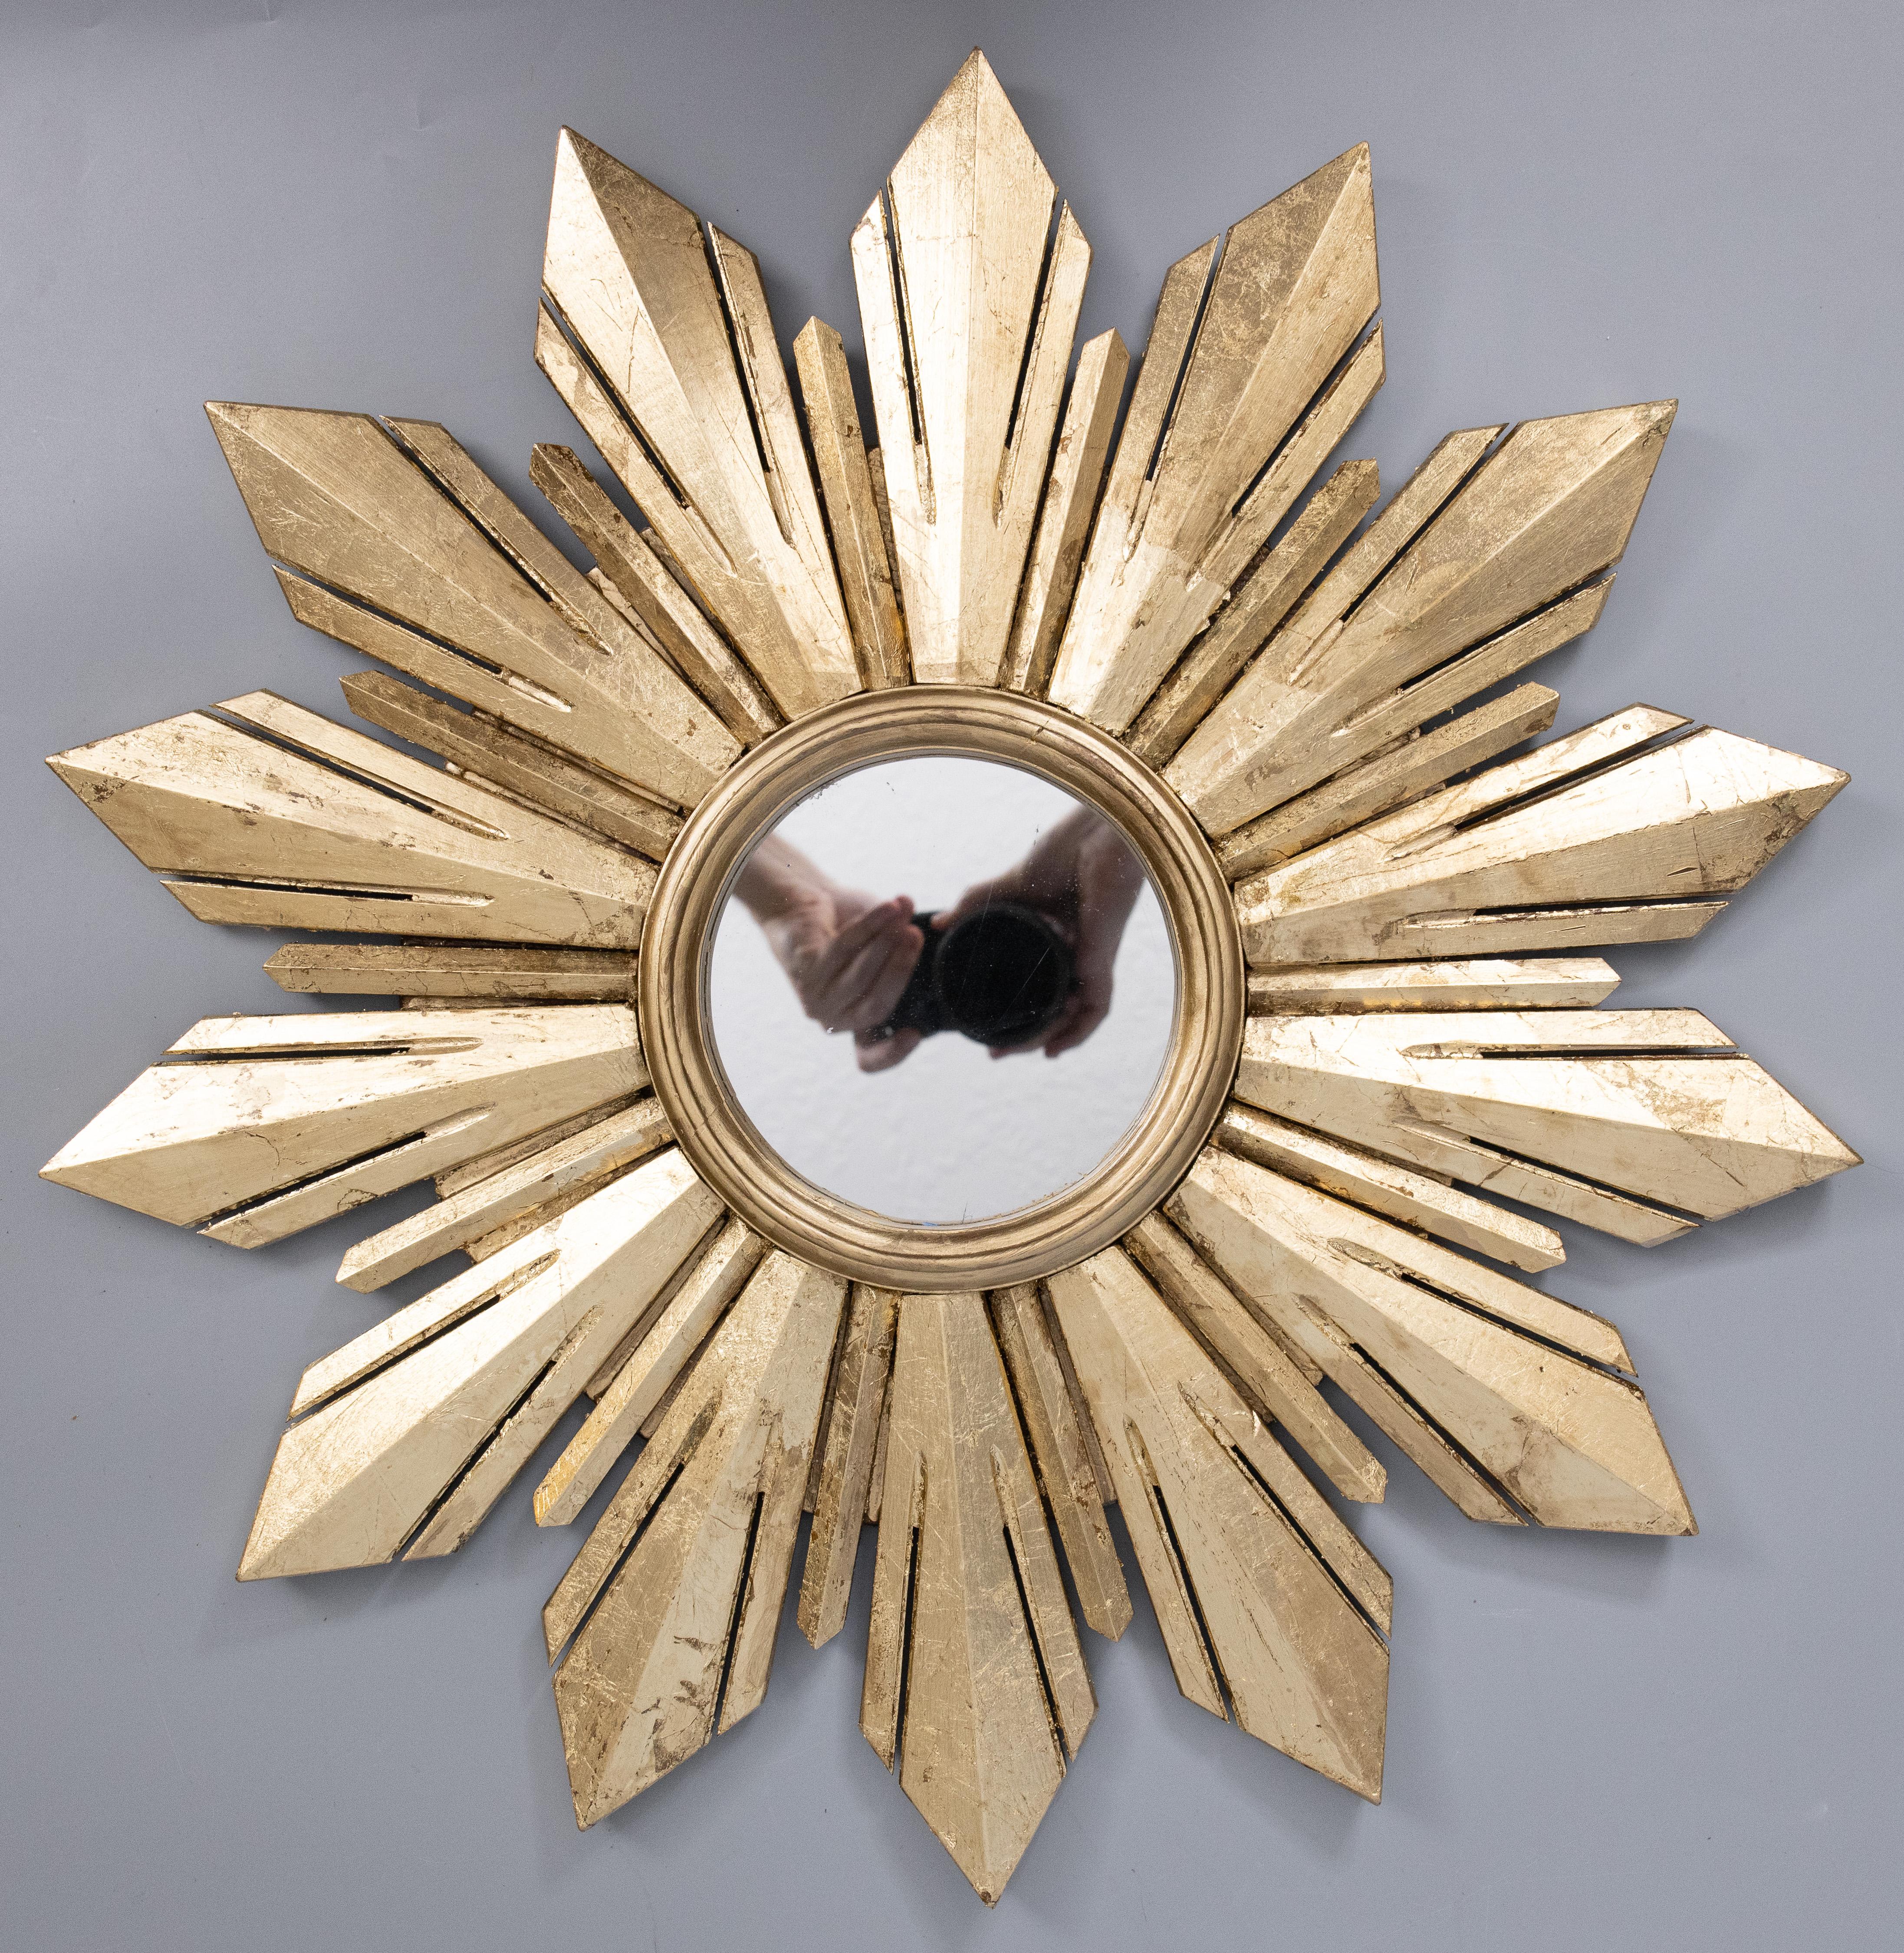 A stunning mid 20th-century French gold leaf gilded wood sunburst / starburst mirror. This fabulous mirror has a gorgeous gilt patina and stylish modern design. These sunburst mirrors are beautiful displayed in groupings of various sizes and